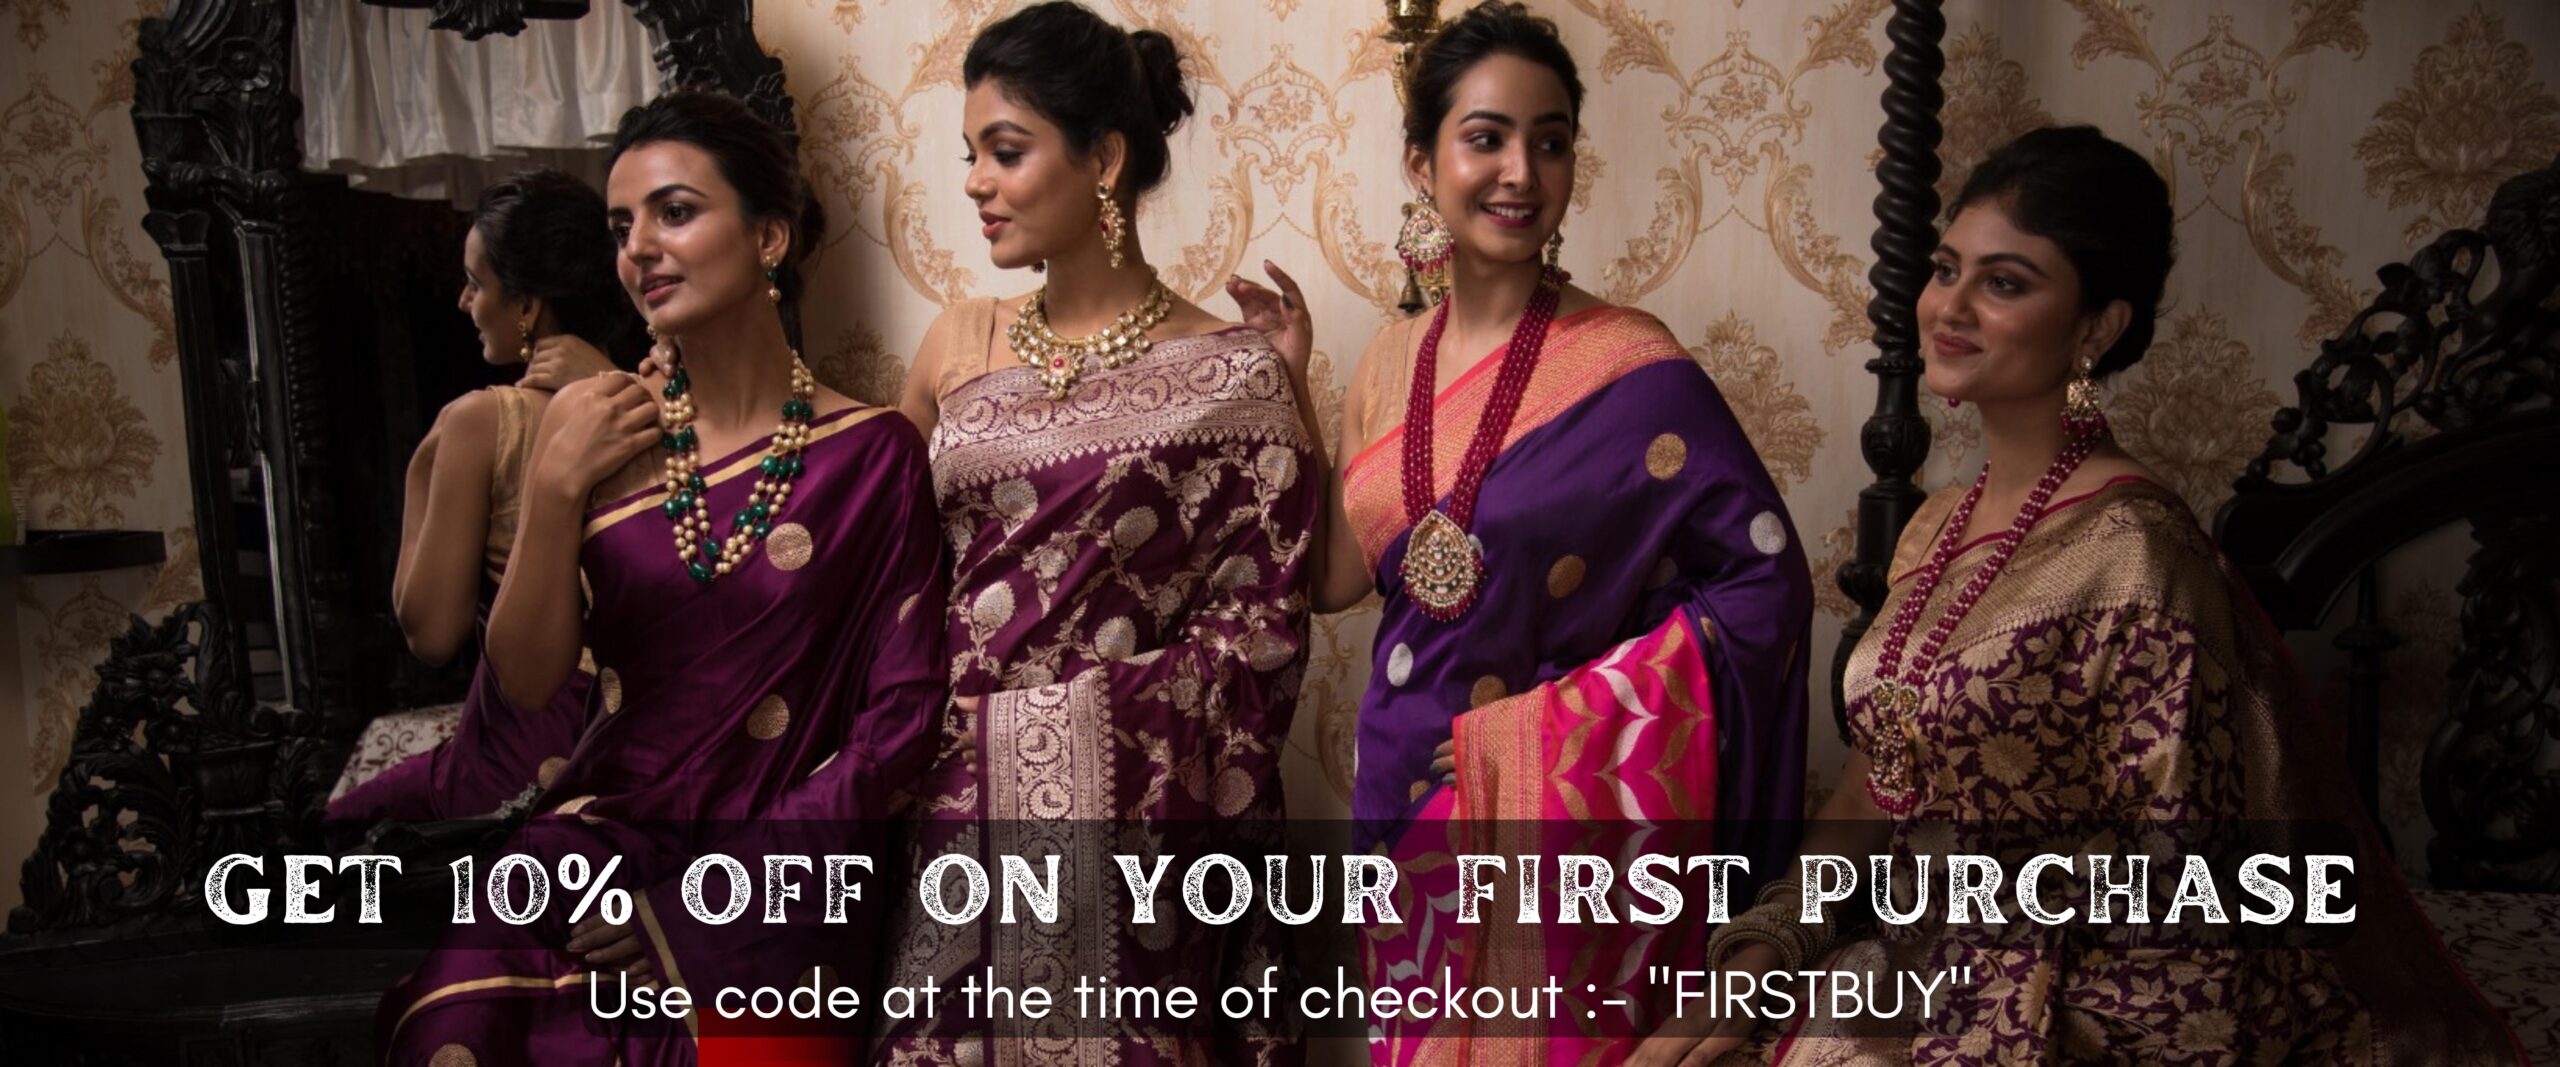 GET 10% OFF ON YOUR FIRST PURCHASE